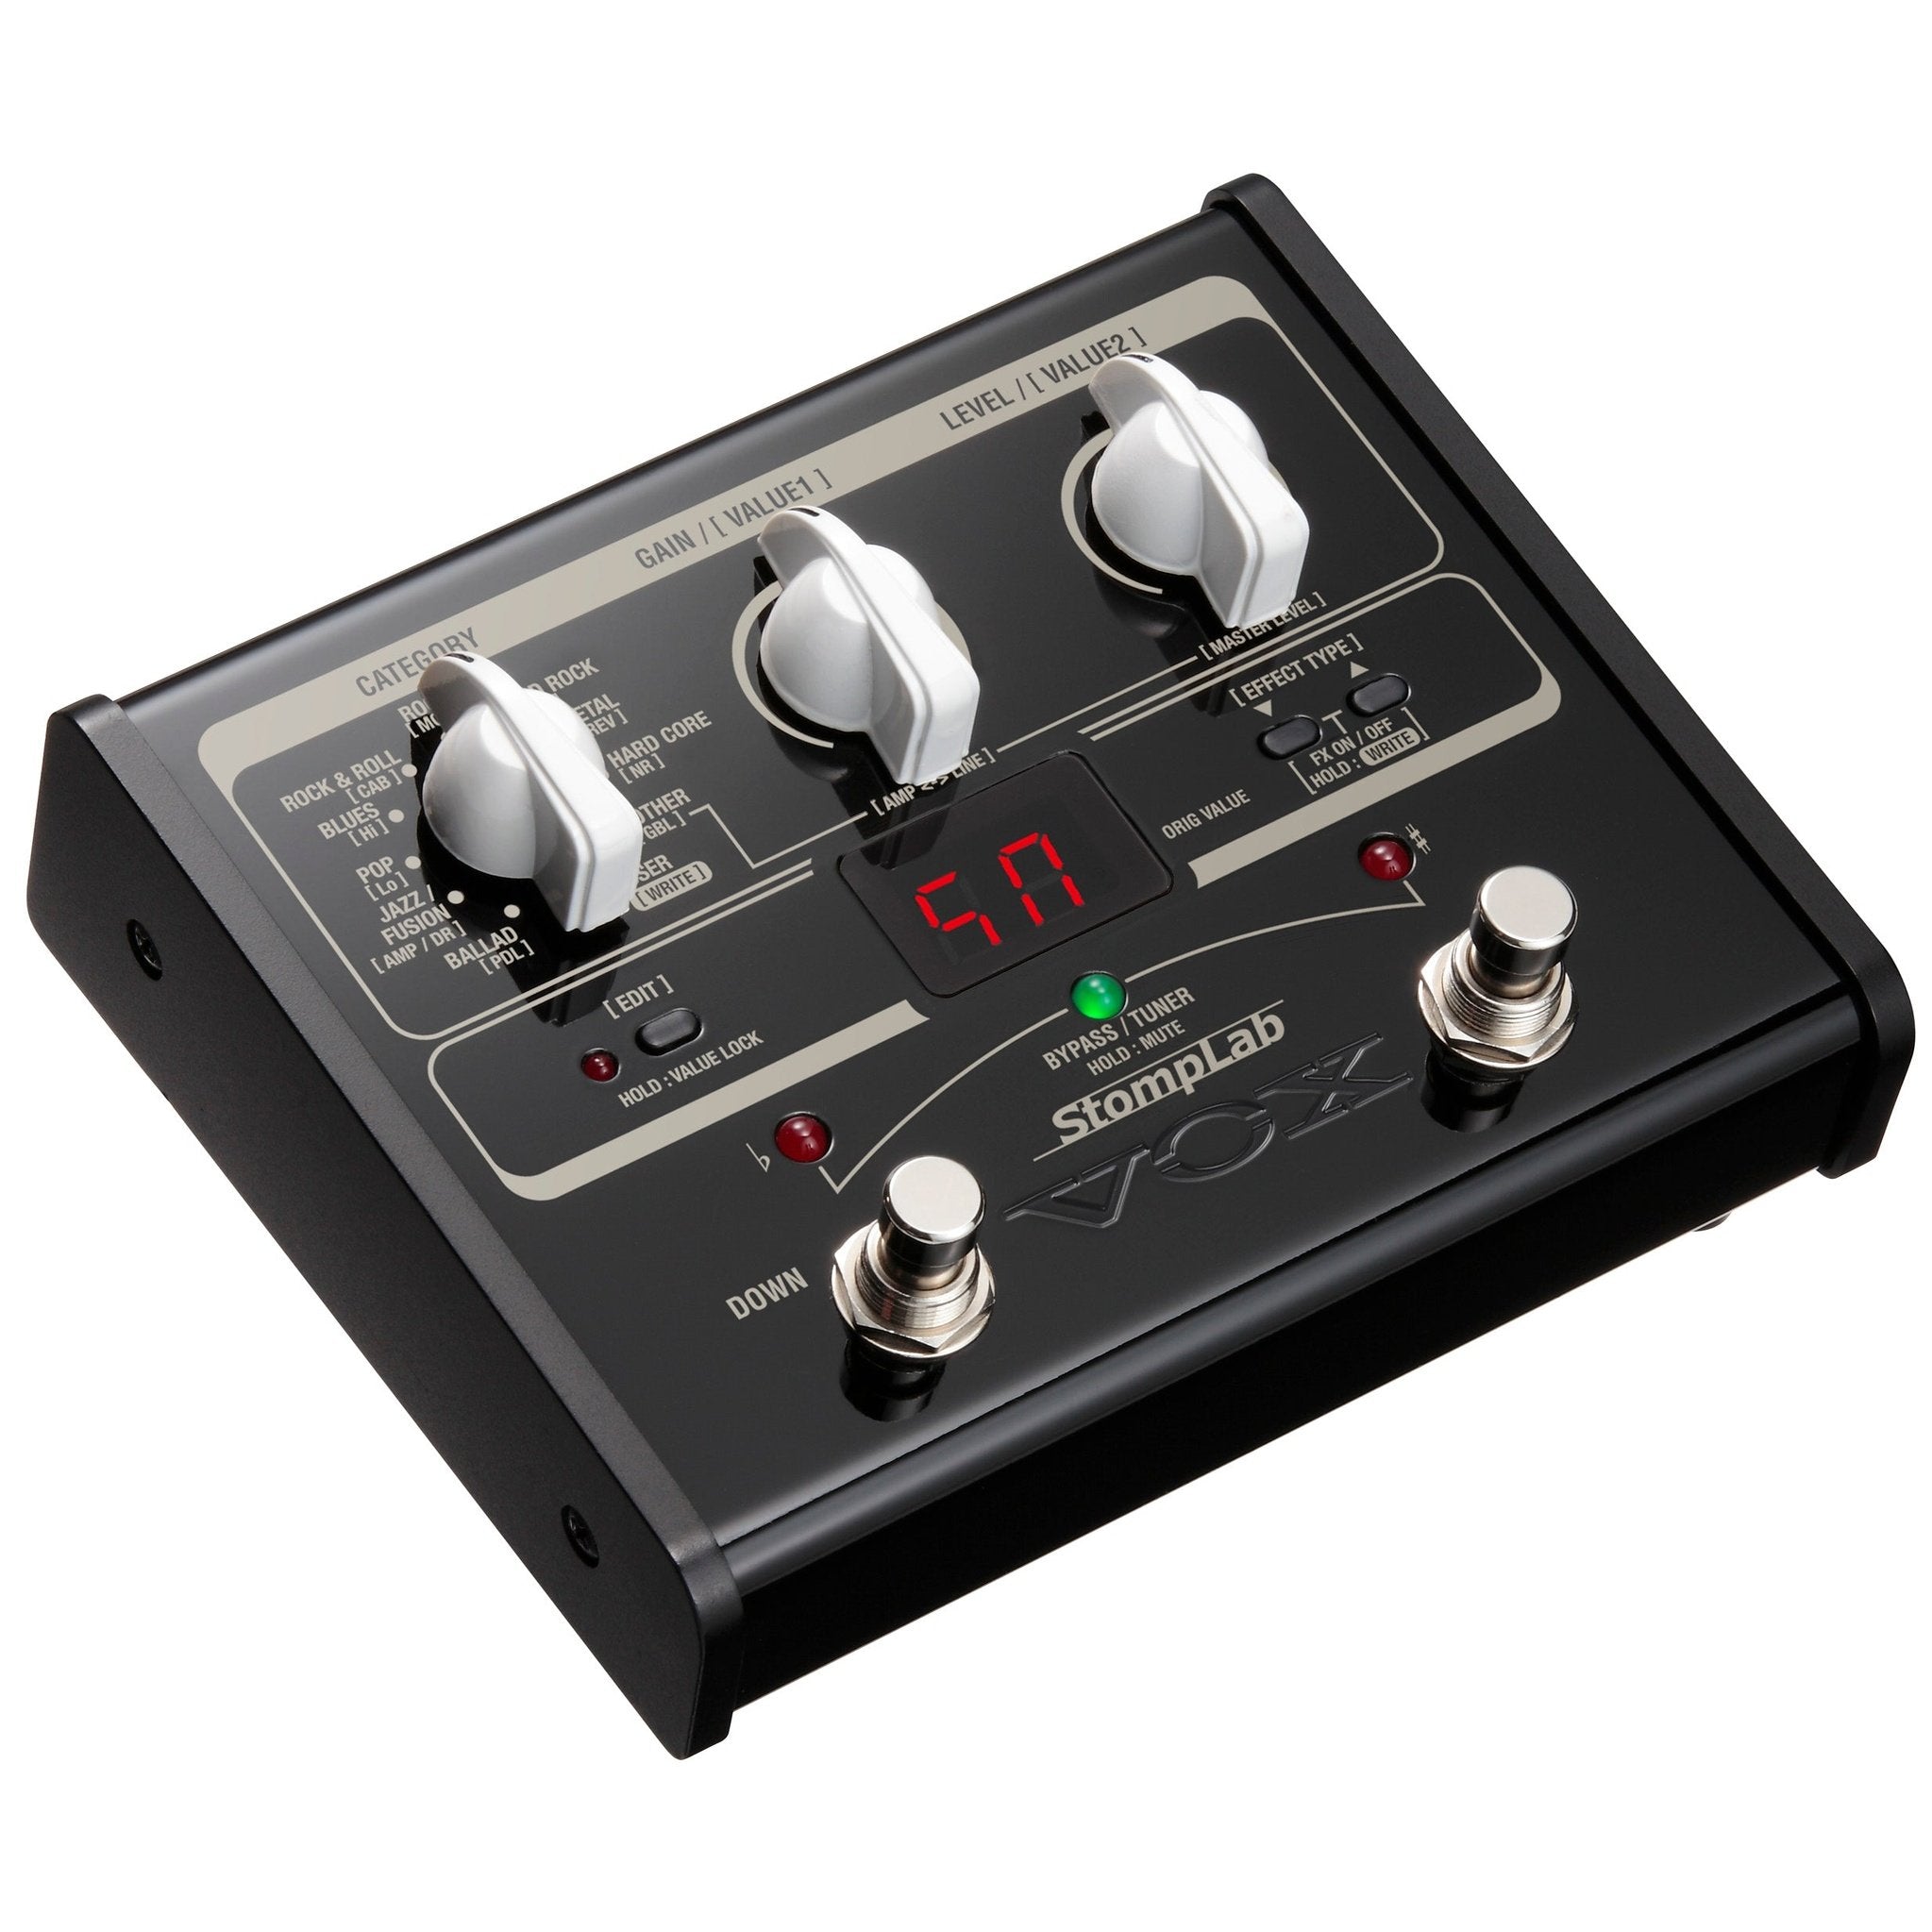 Vox Stomplab 1G Multi Effects - Guitar 2